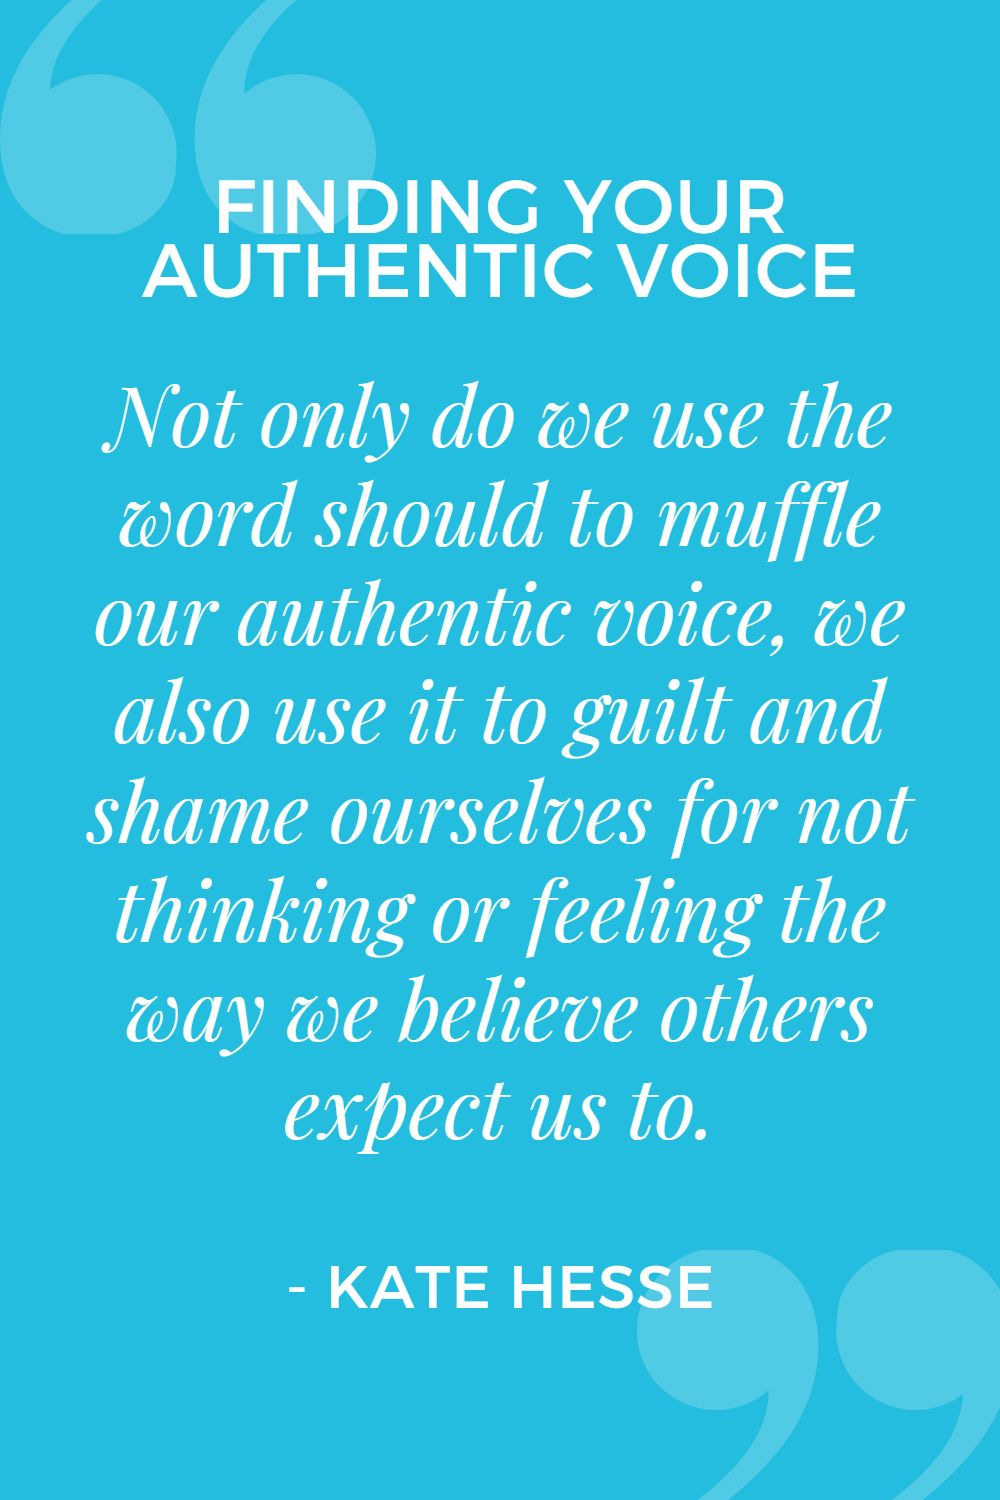 Not only do we use the word should to muffle our authentic voice, we also use it to guilt and shame ourselves for not thinking or feeling the way we believe others expect us to.